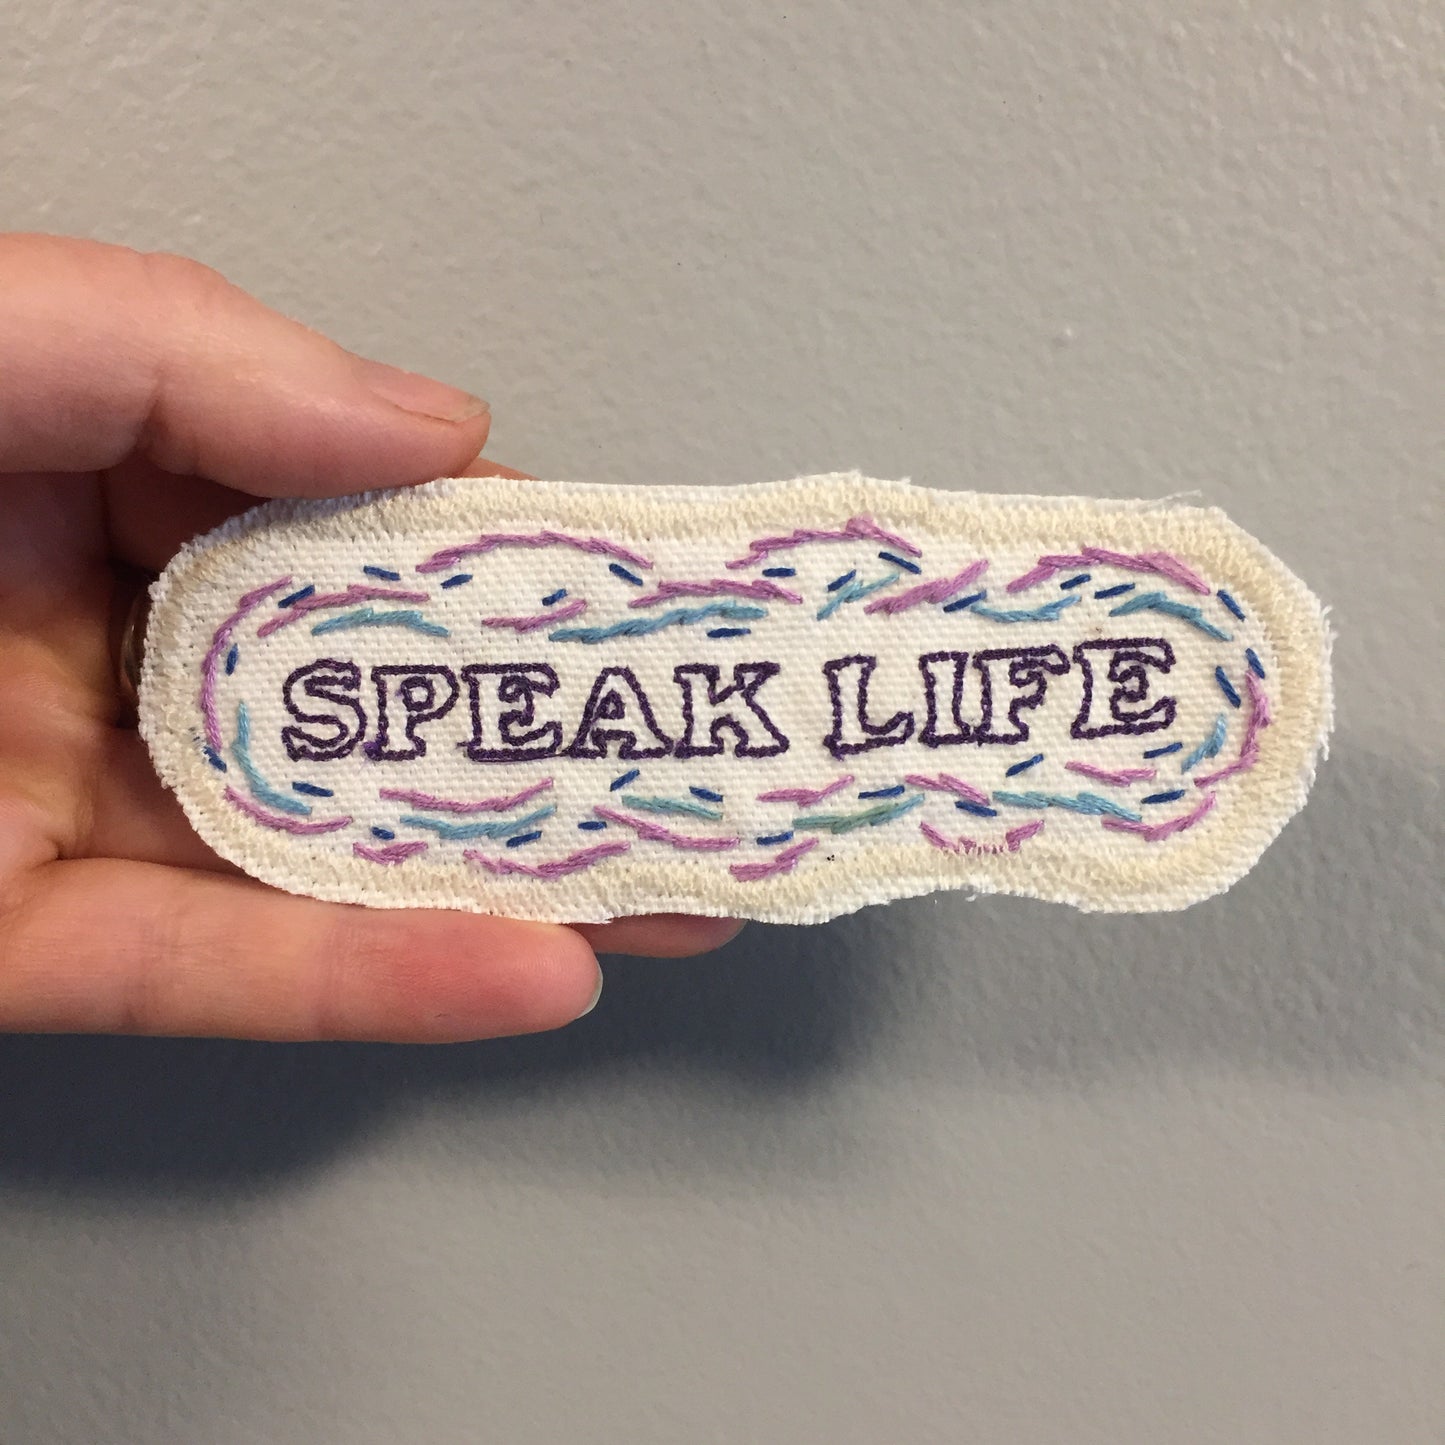 Speak Life! Embroidered Patch